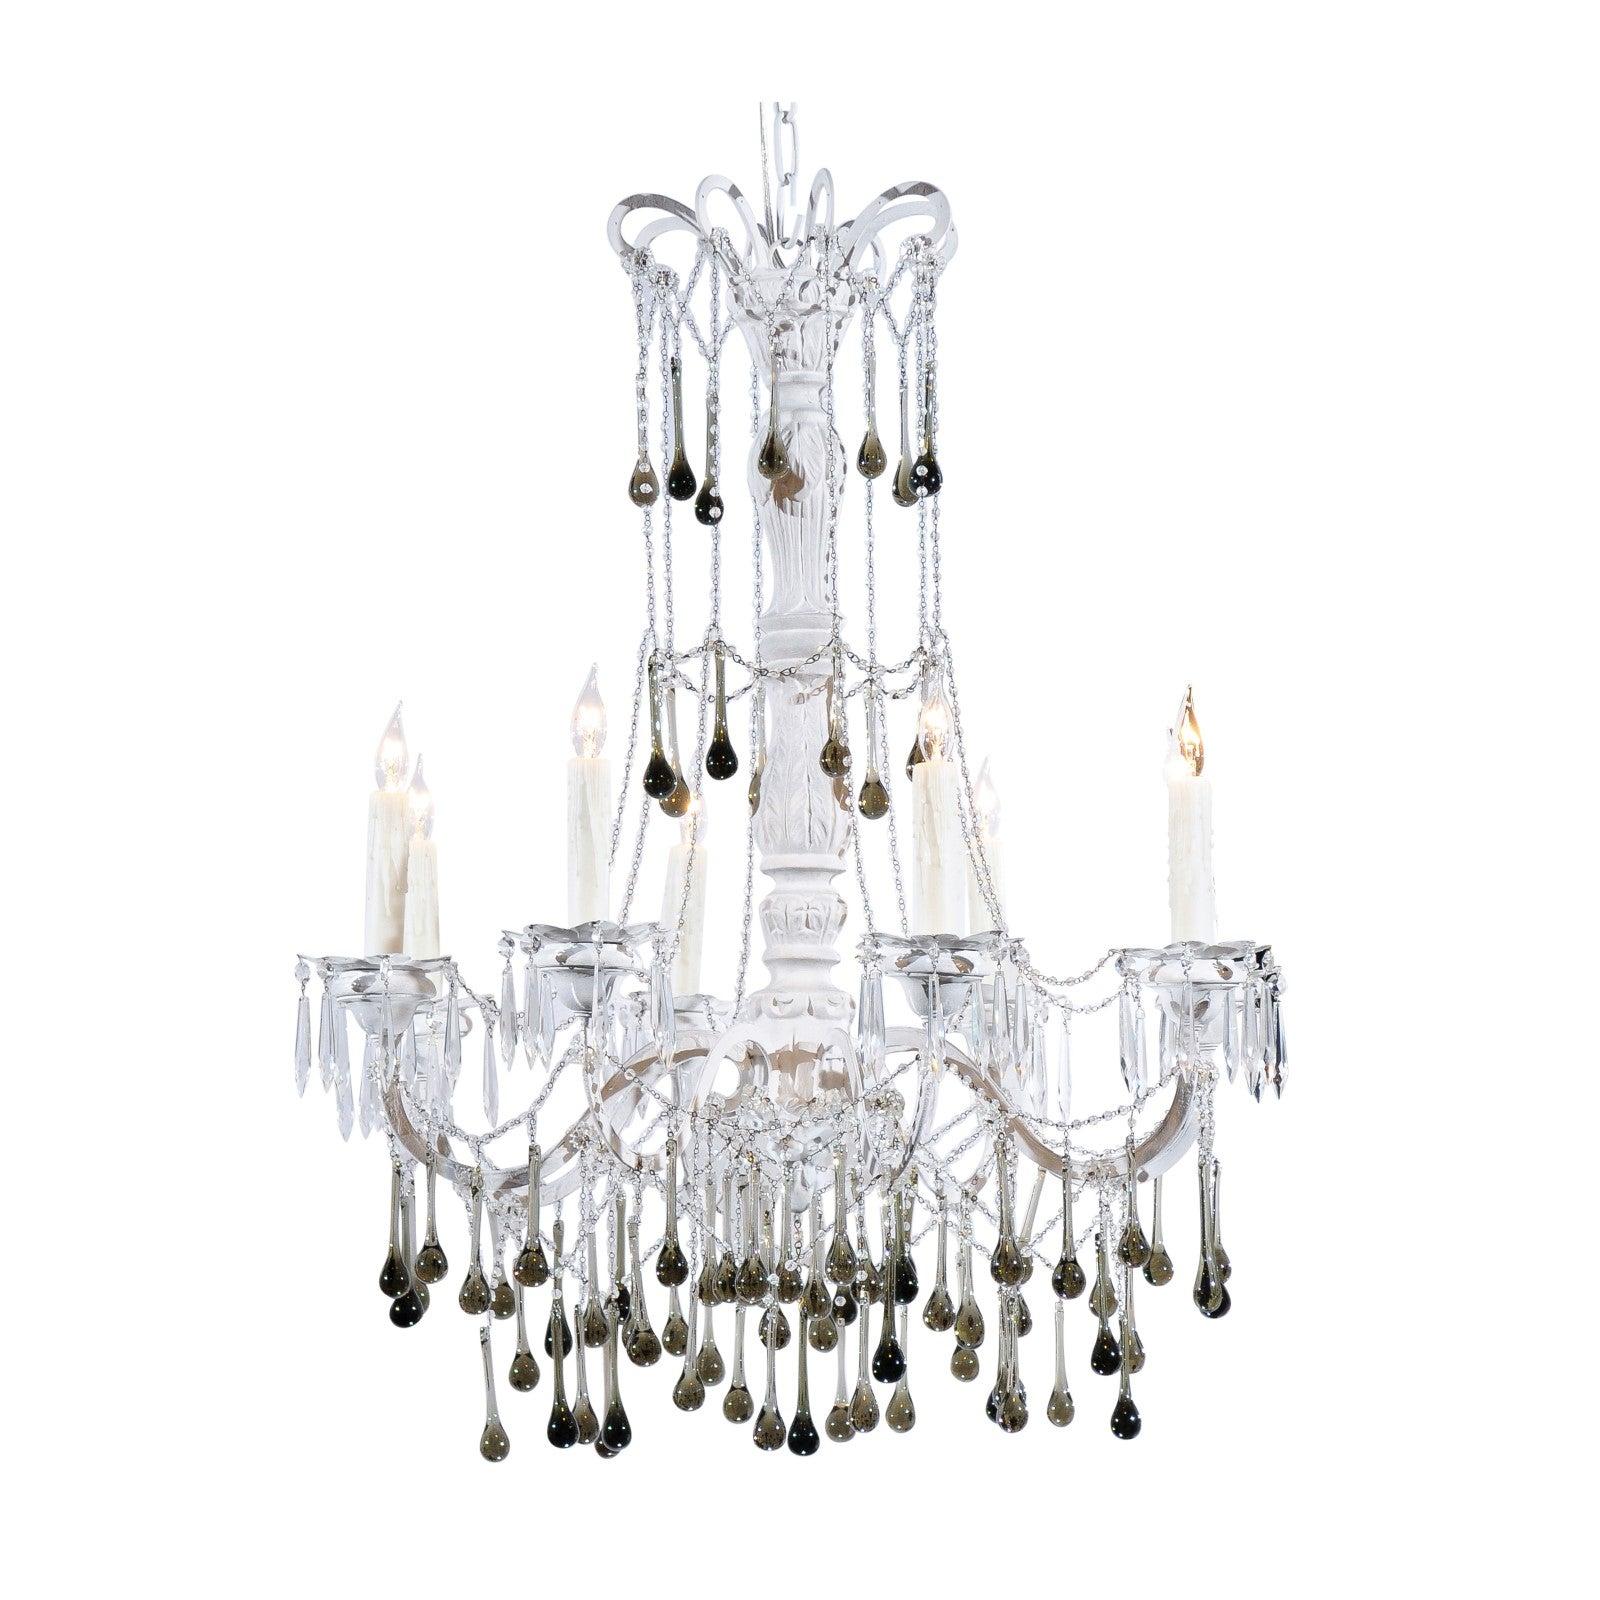 Vintage Italian 1960s Eight Light Crystal Chandelier with Olive Teardrop Prisms